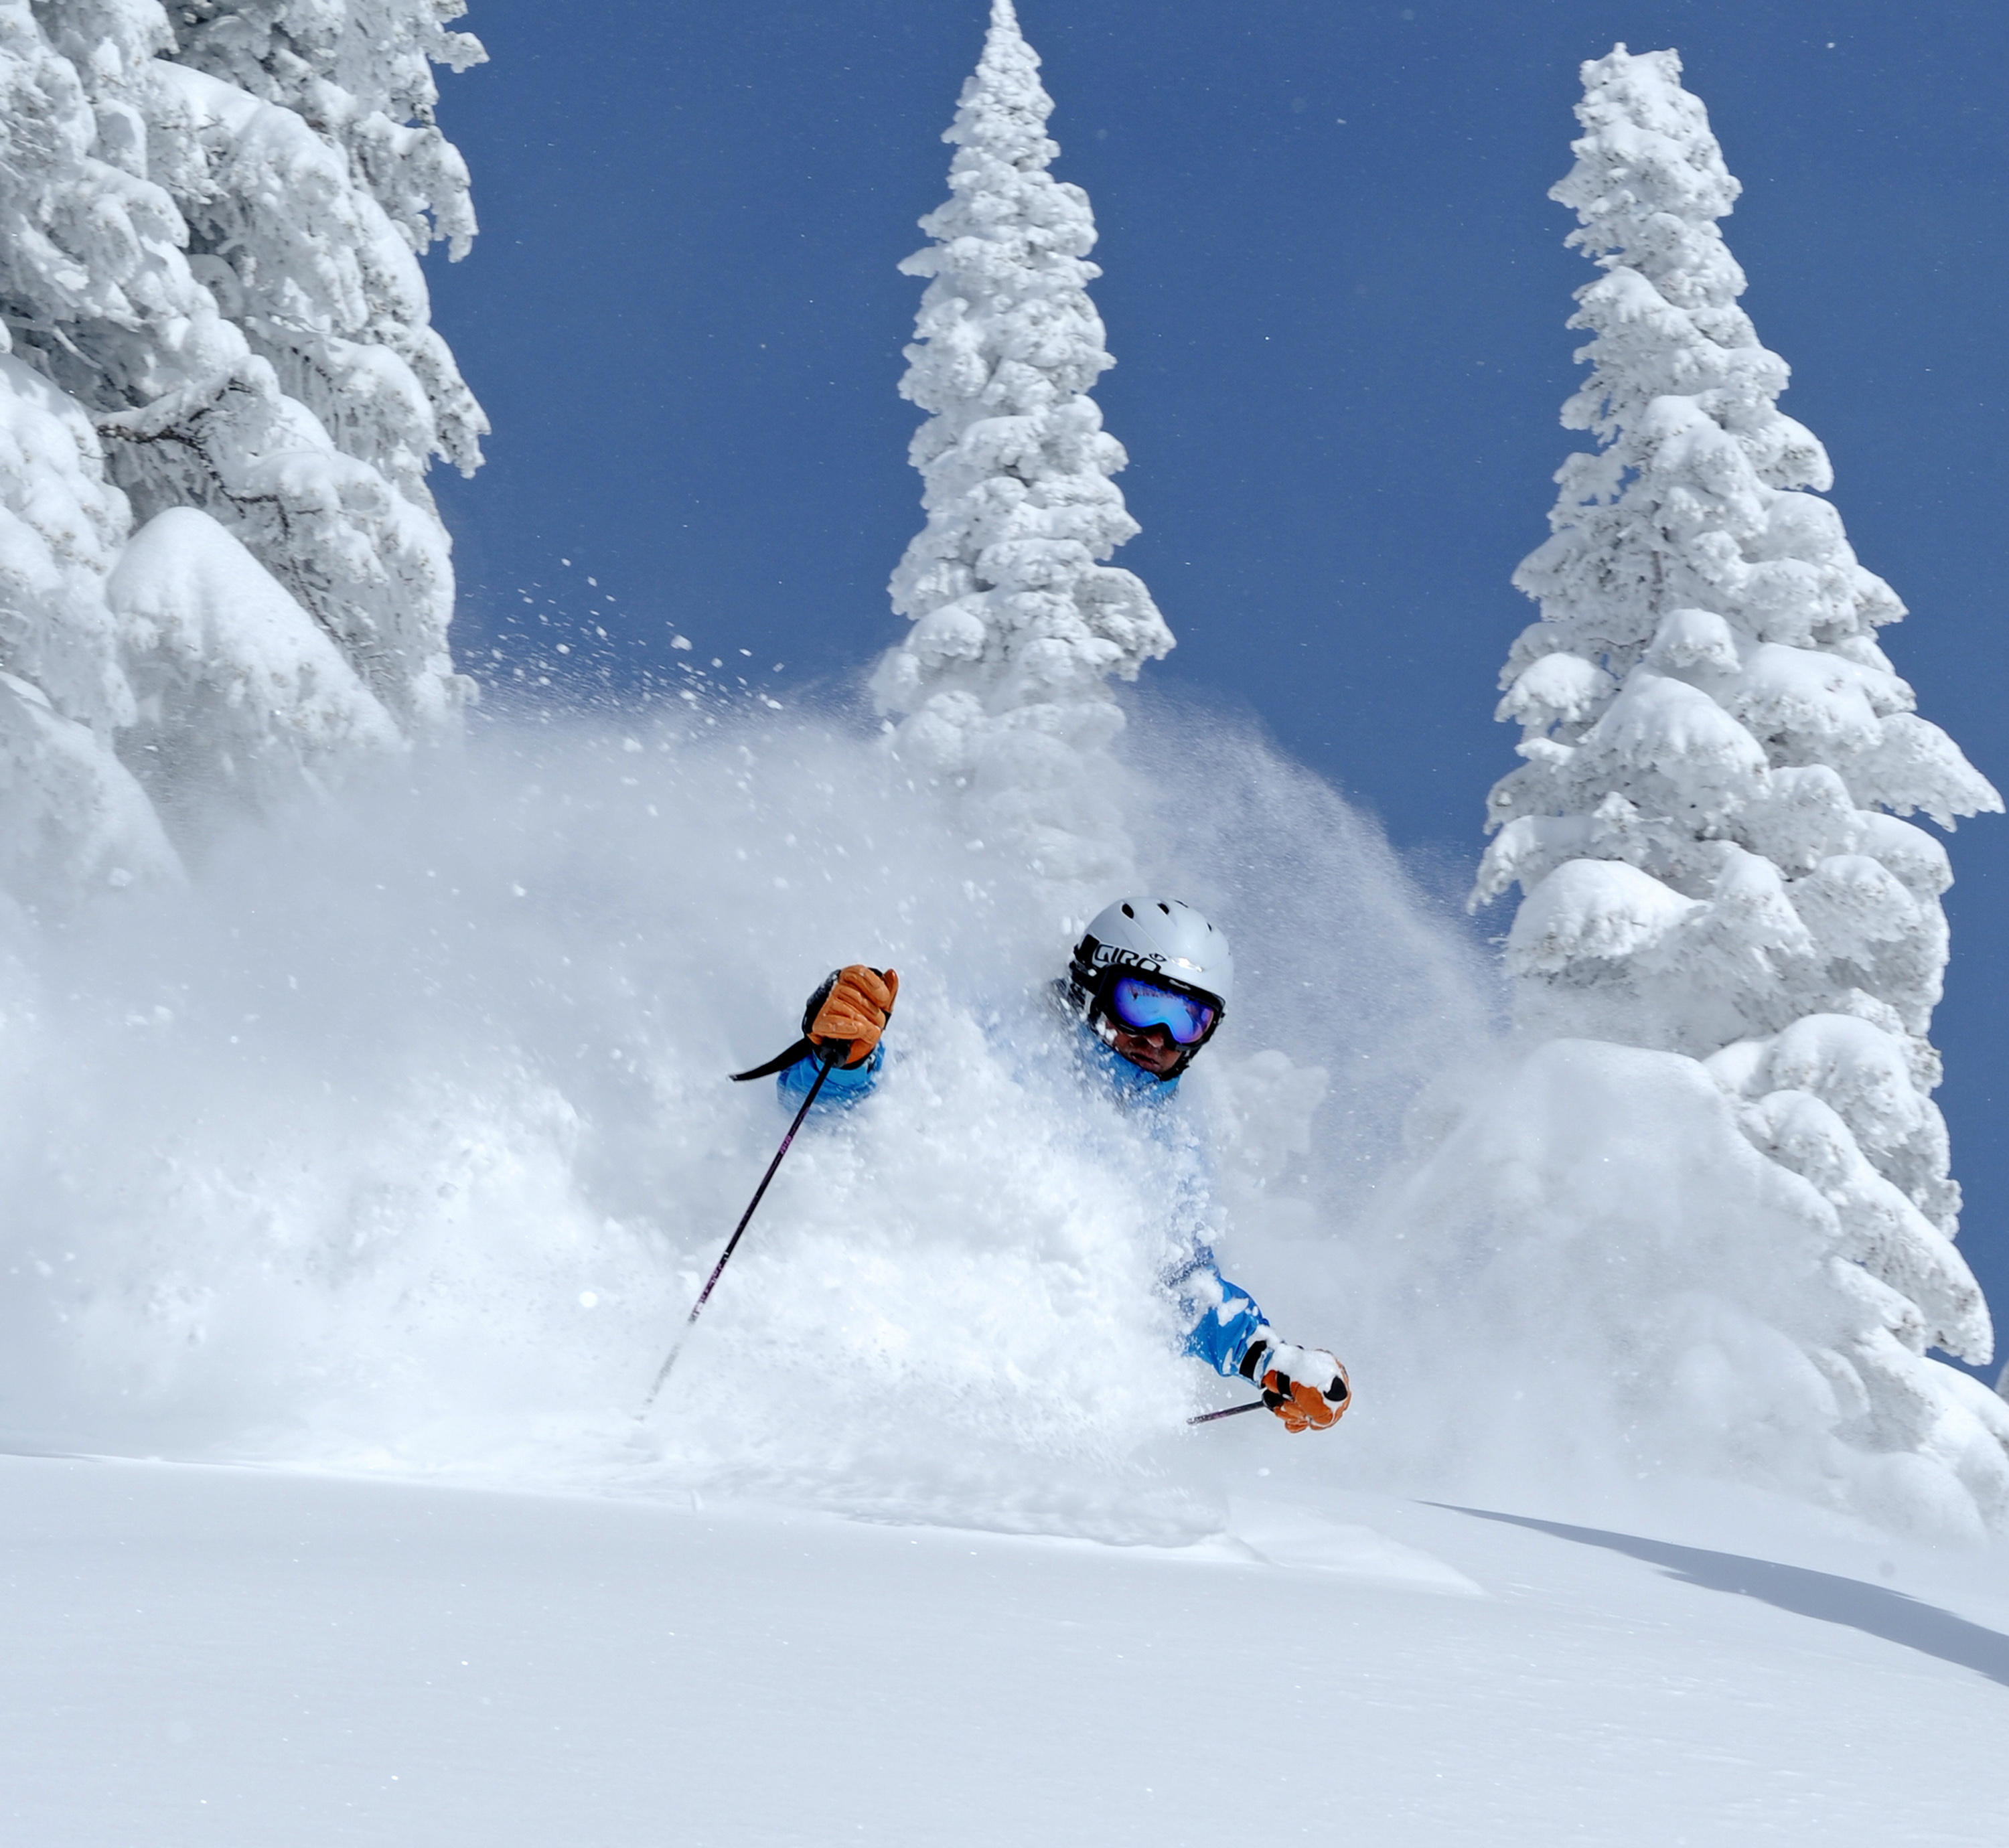 Powder Skiing Wallpaper Image Pictures Becuo